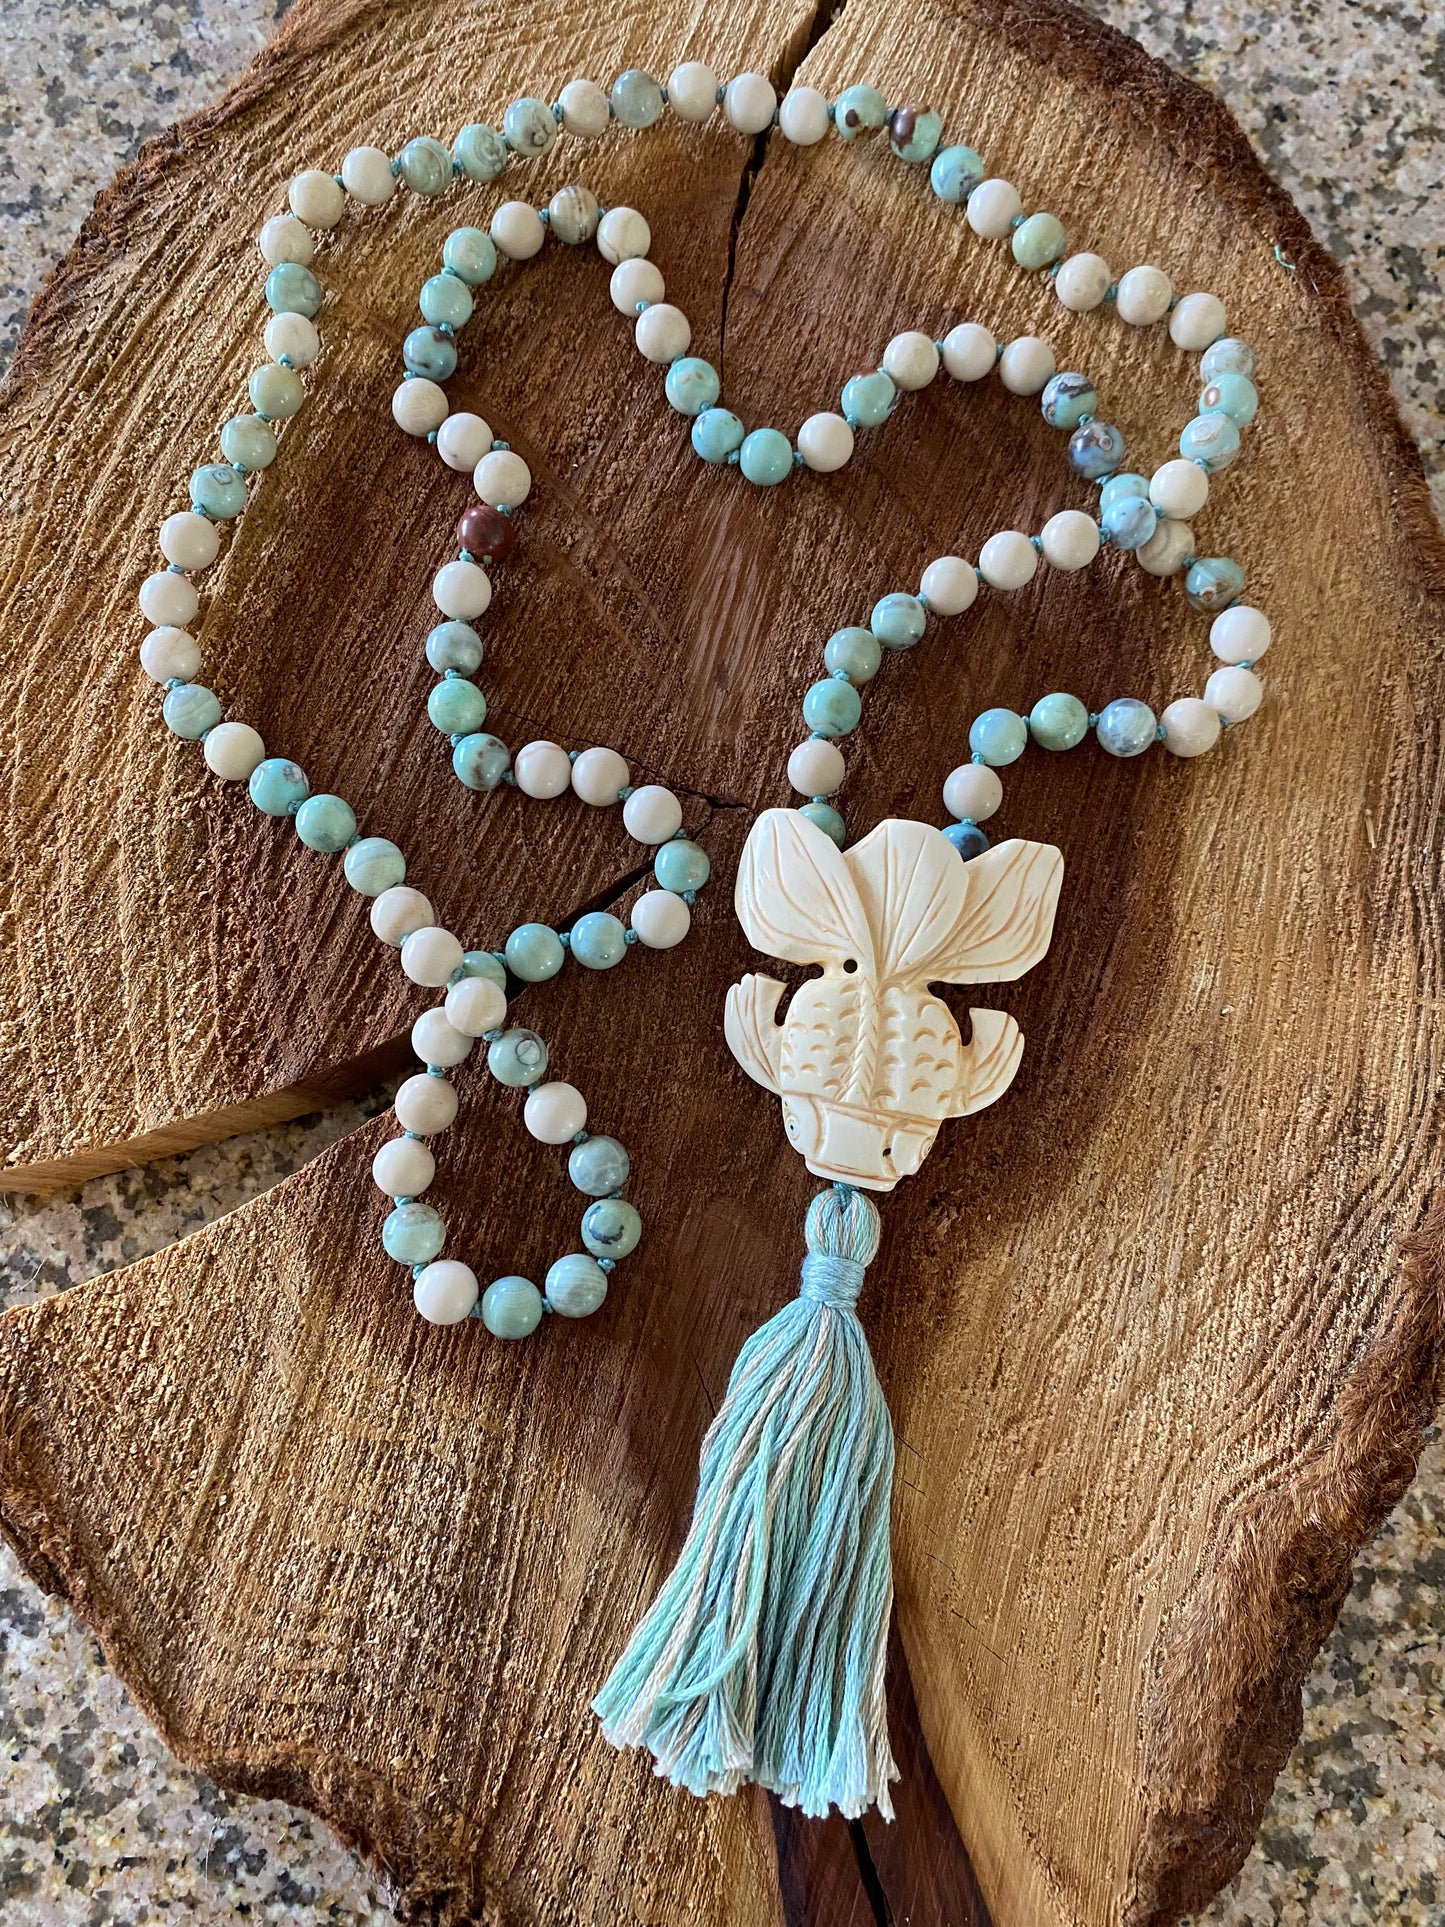 Green Blue Turquoise Fire Agate and Fossil Mala